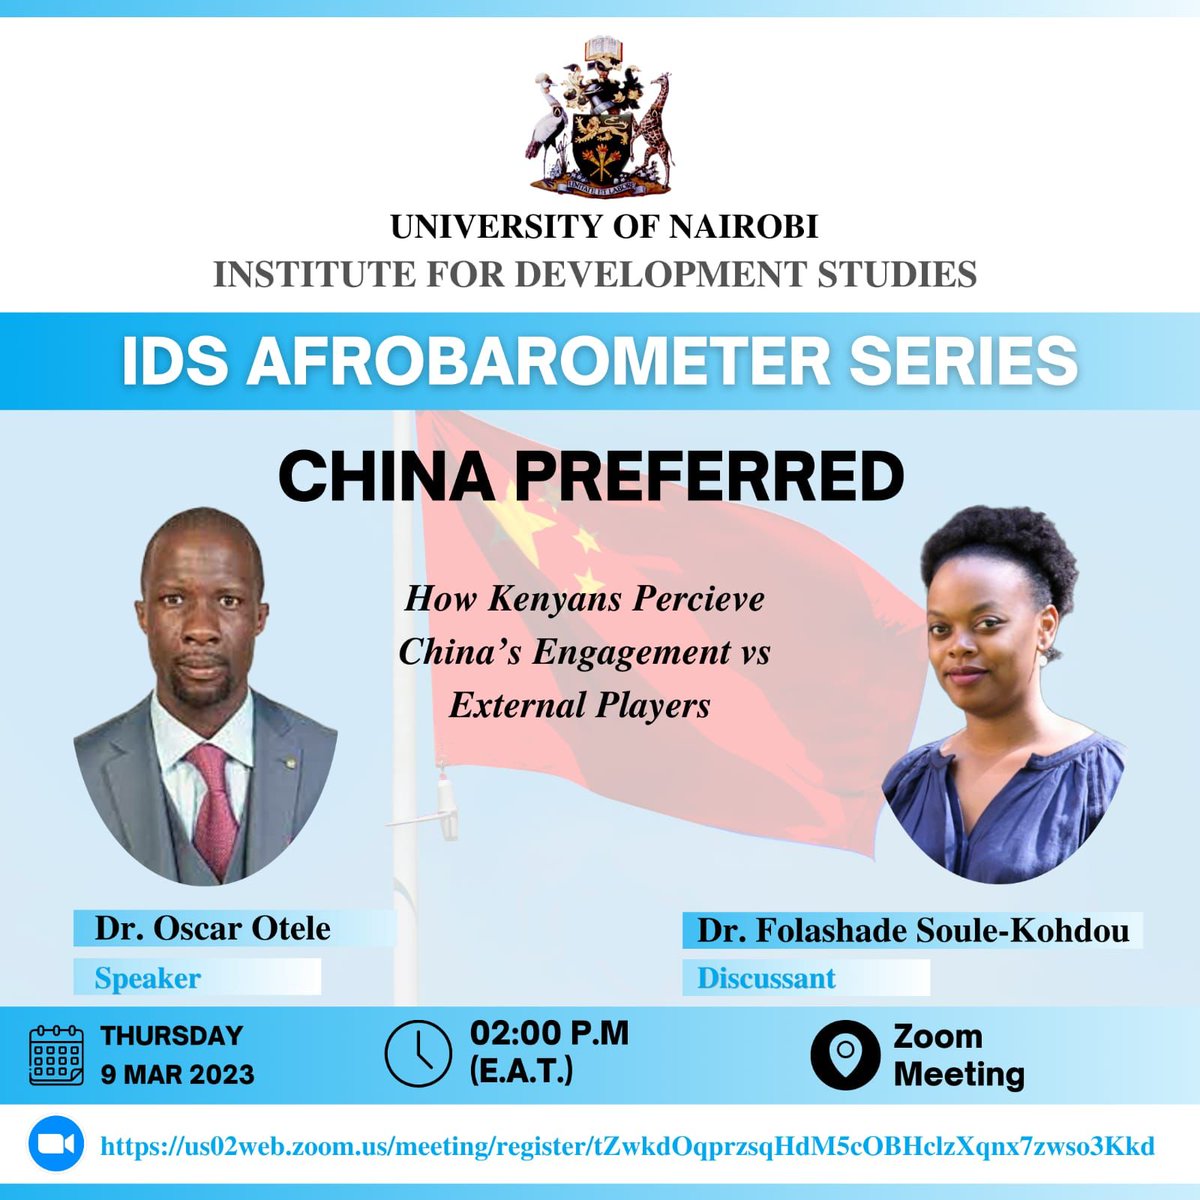 'Majority of Kenyans believed that China's influence is felt in the country yet views on whether China economic influence is mostly declined. China model was fairly steady in both rural and urban areas' Dr. Oscar Otele
 #IDSAfrobarometerSeries #IsChinaPreferred @IDS_UONBI
@uonbi